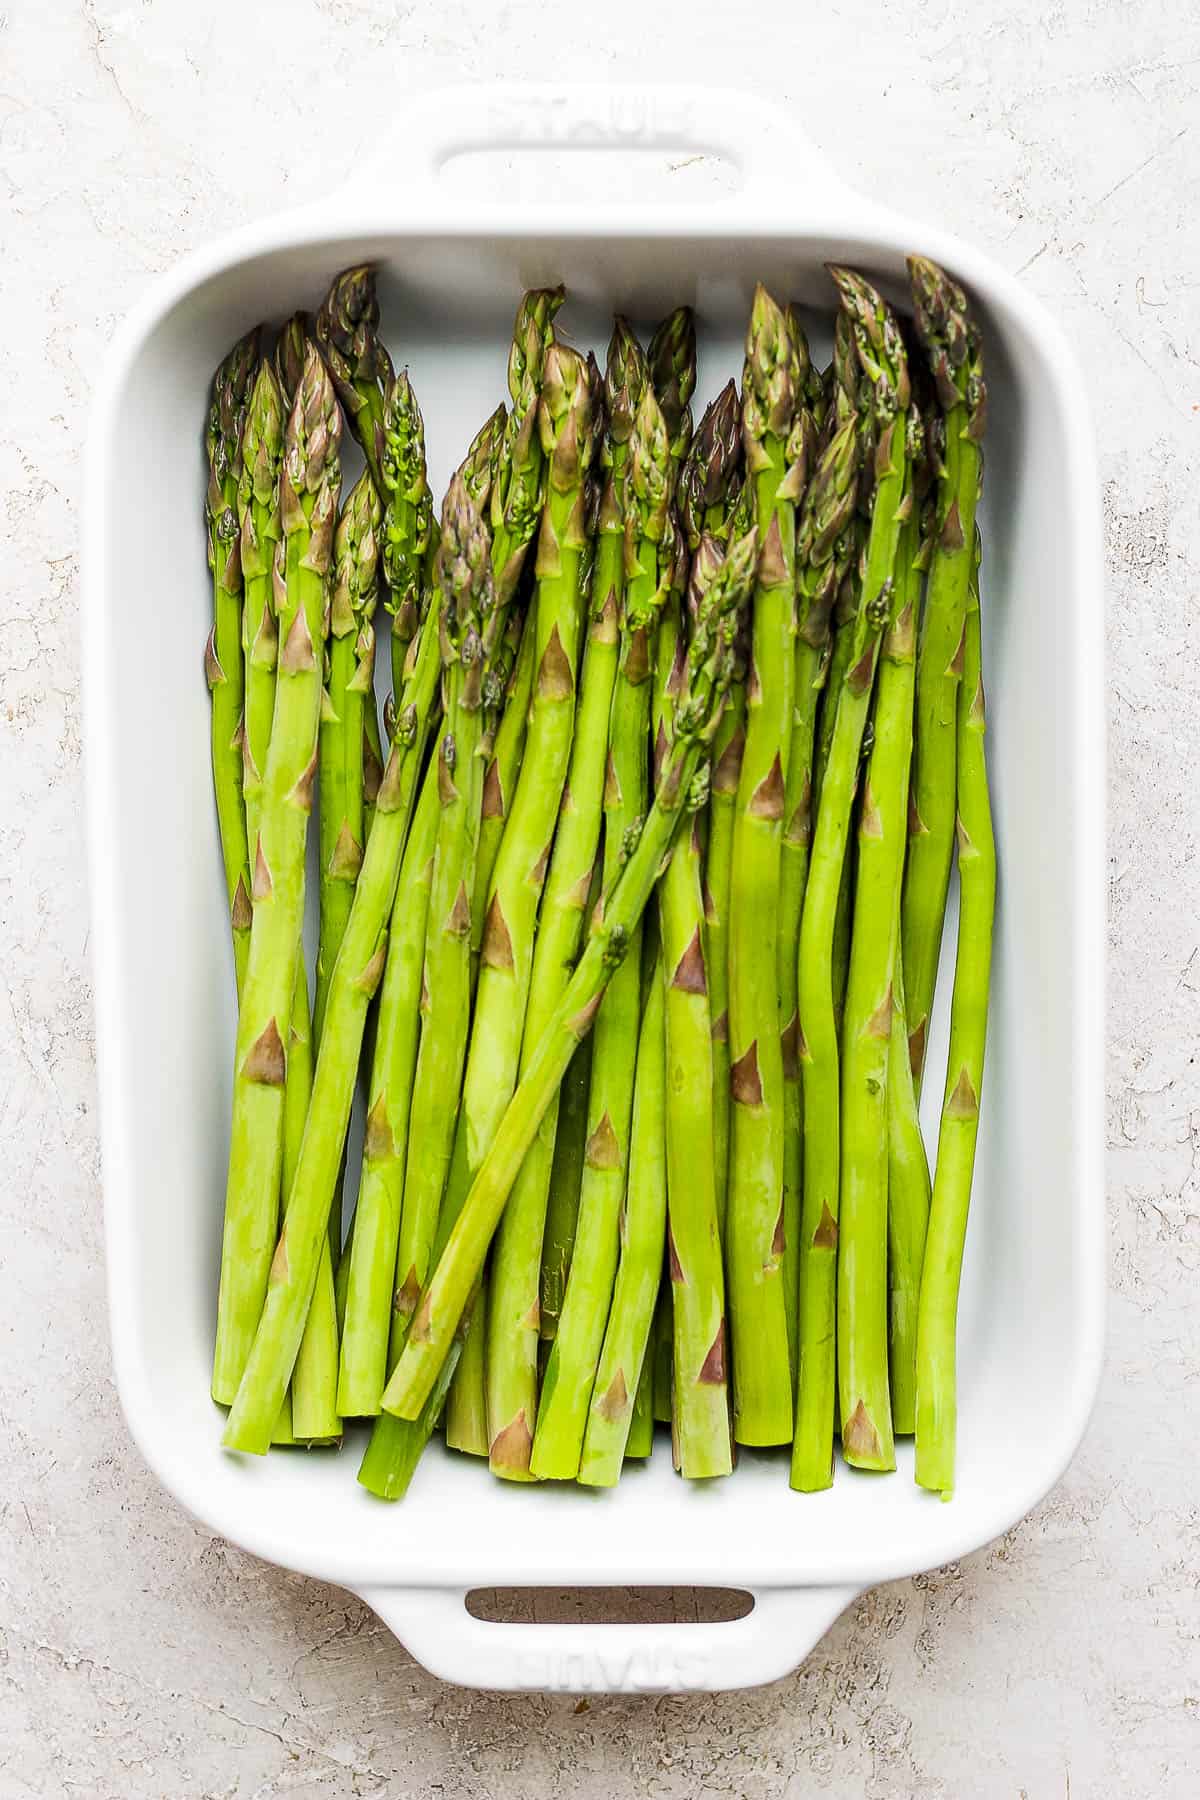 Trimmed asparagus stalks in a shallow, white baking dish.